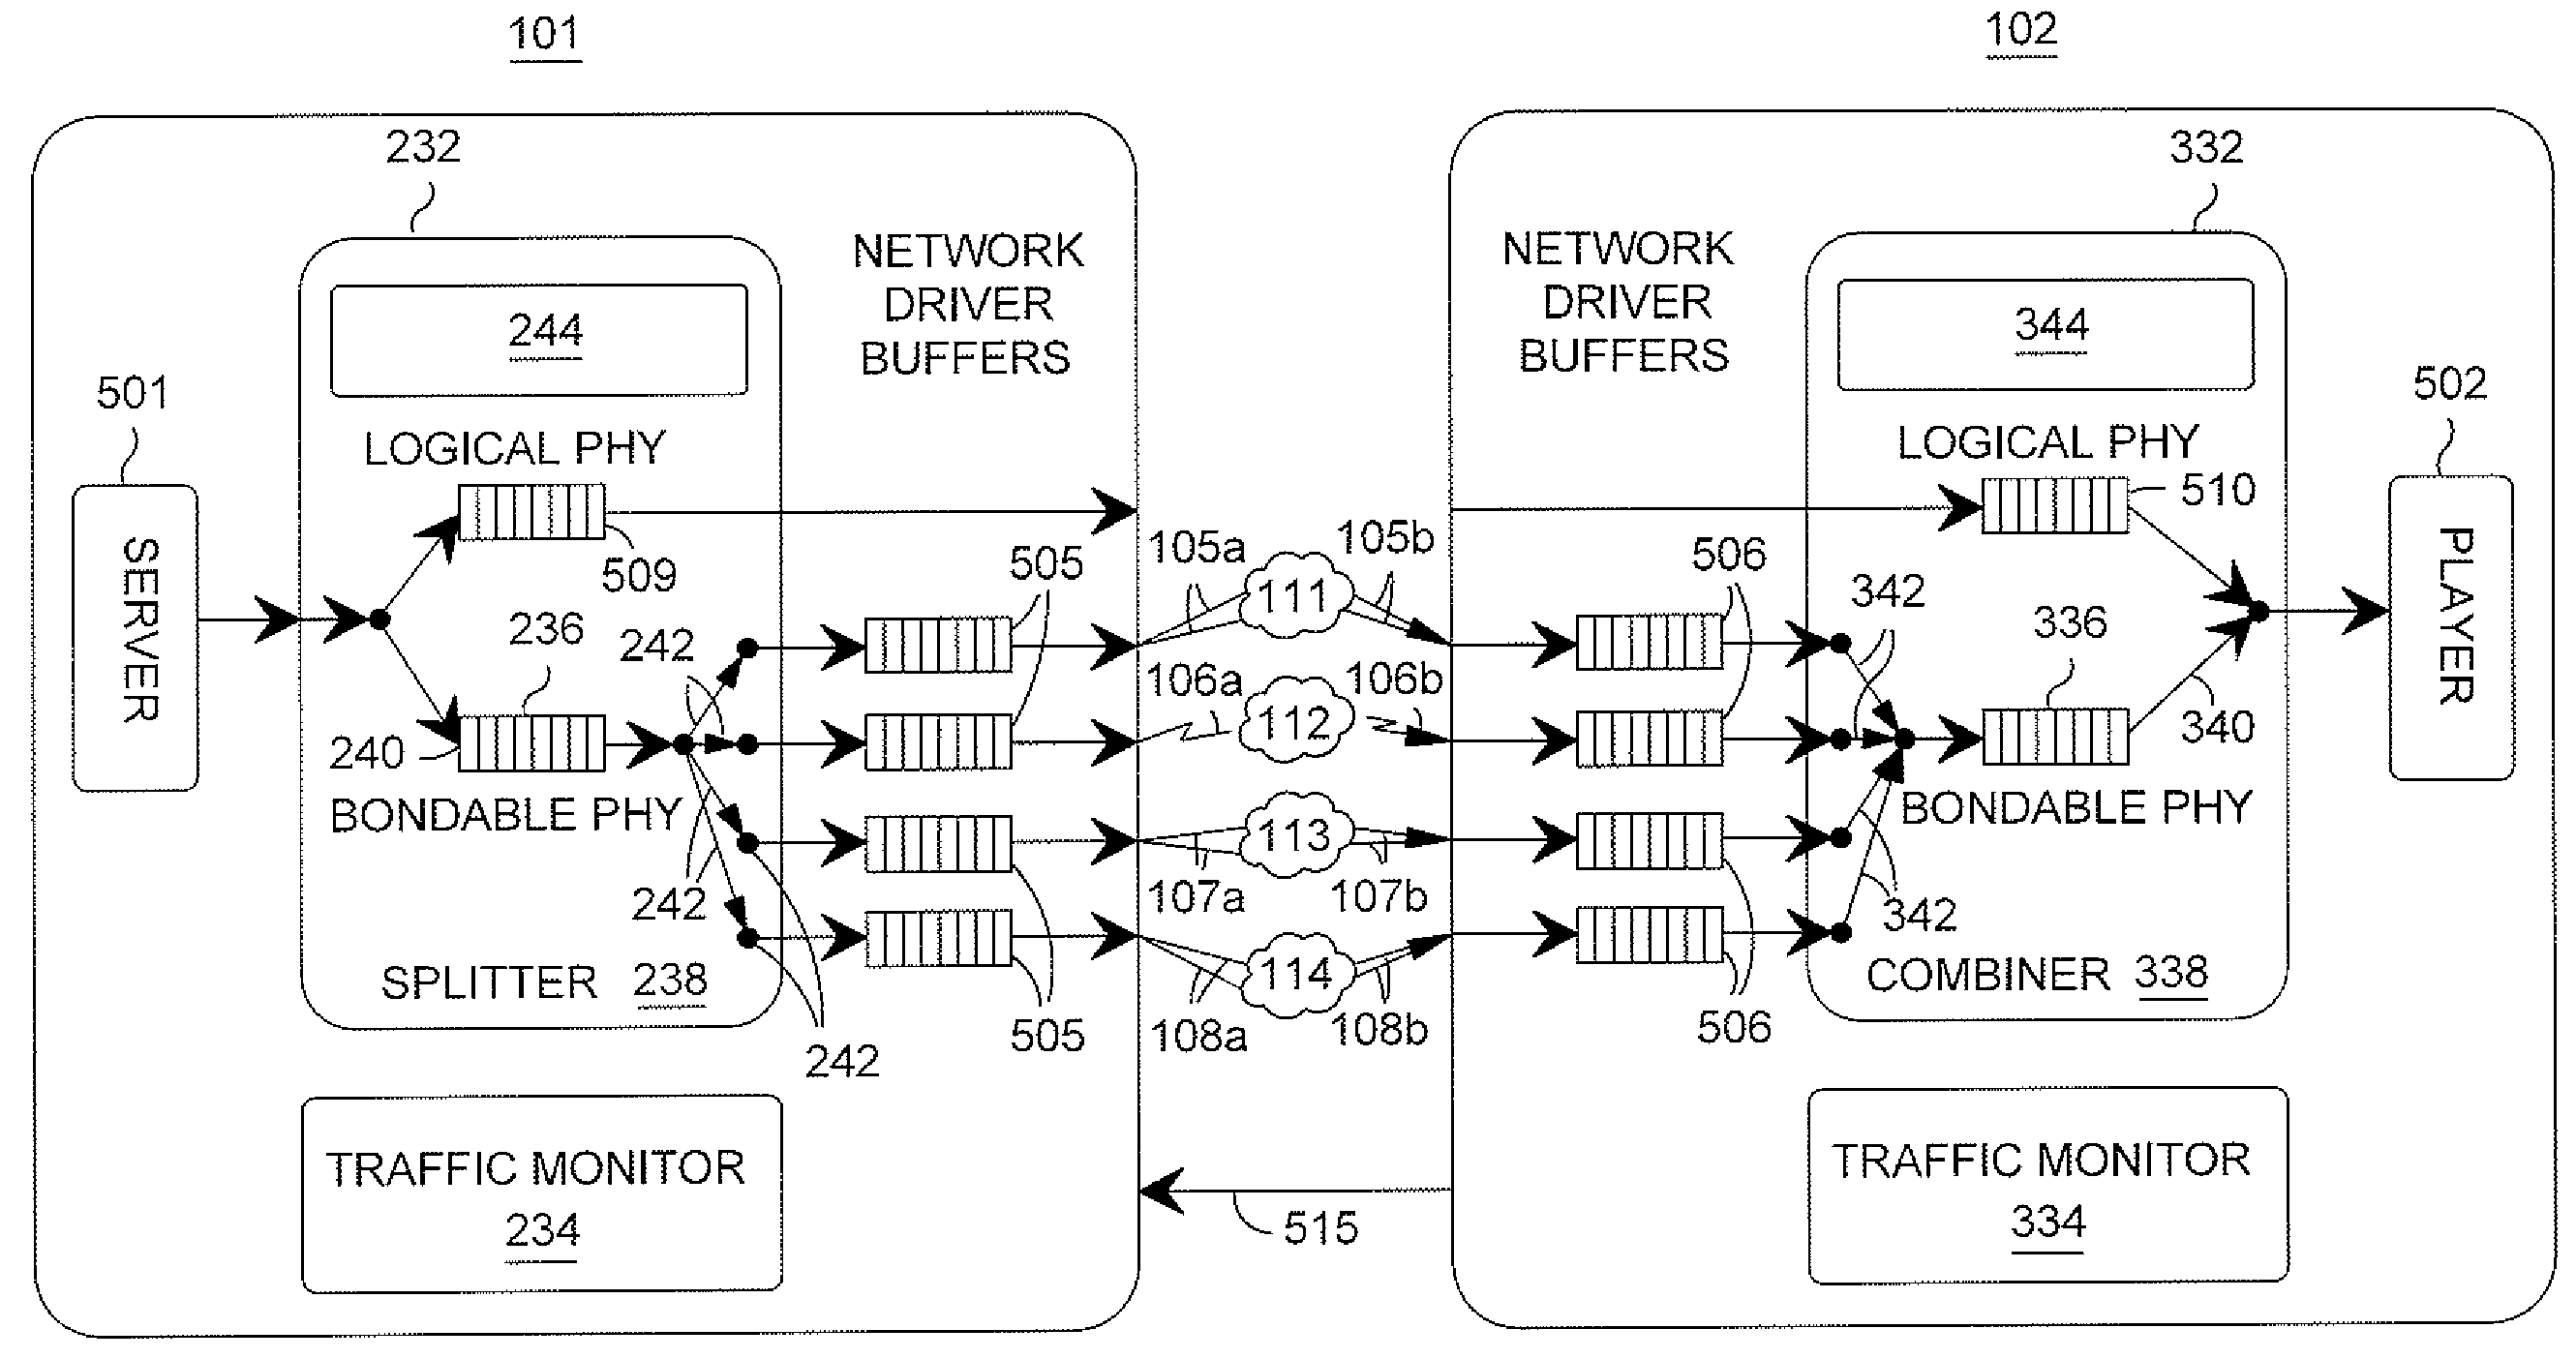 Efficient network utilization using multiple physical interfaces